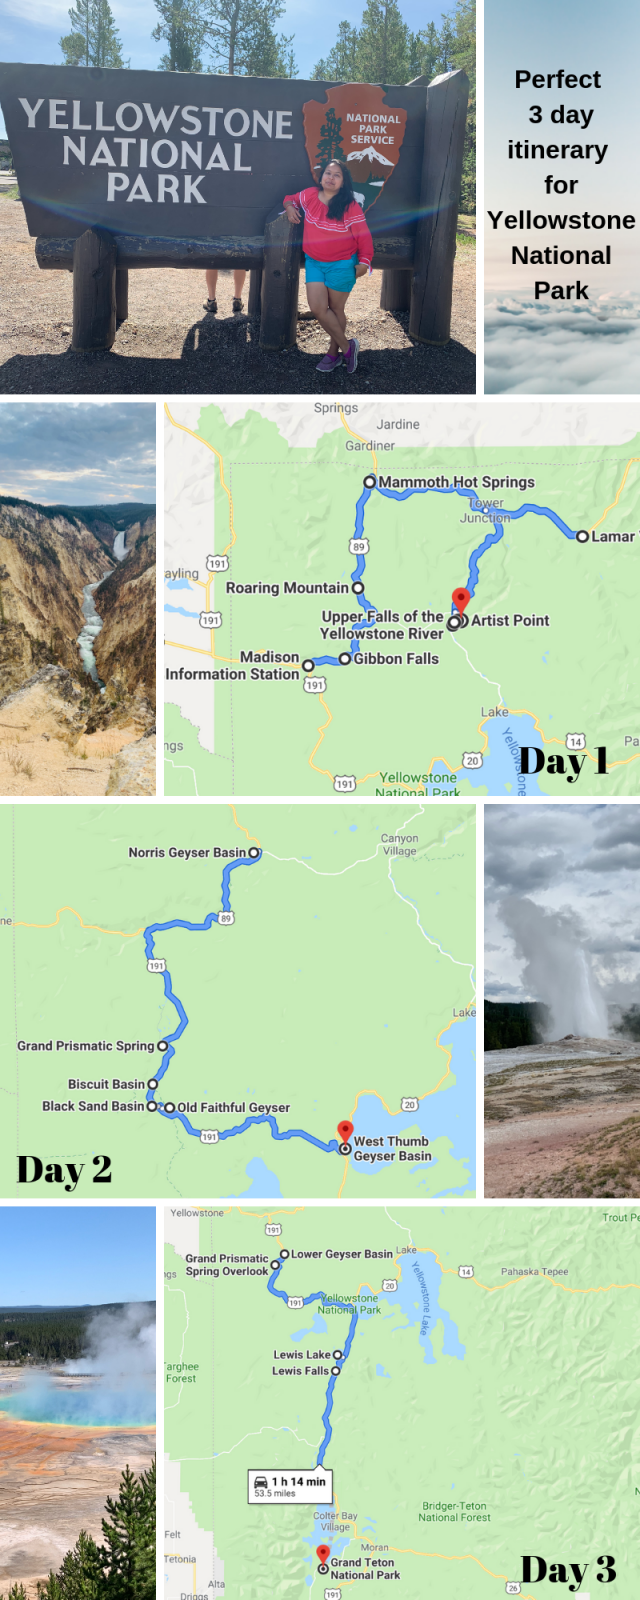 perfect-3-day-itinerary-for-yellowstone-national-park-urvis-travel